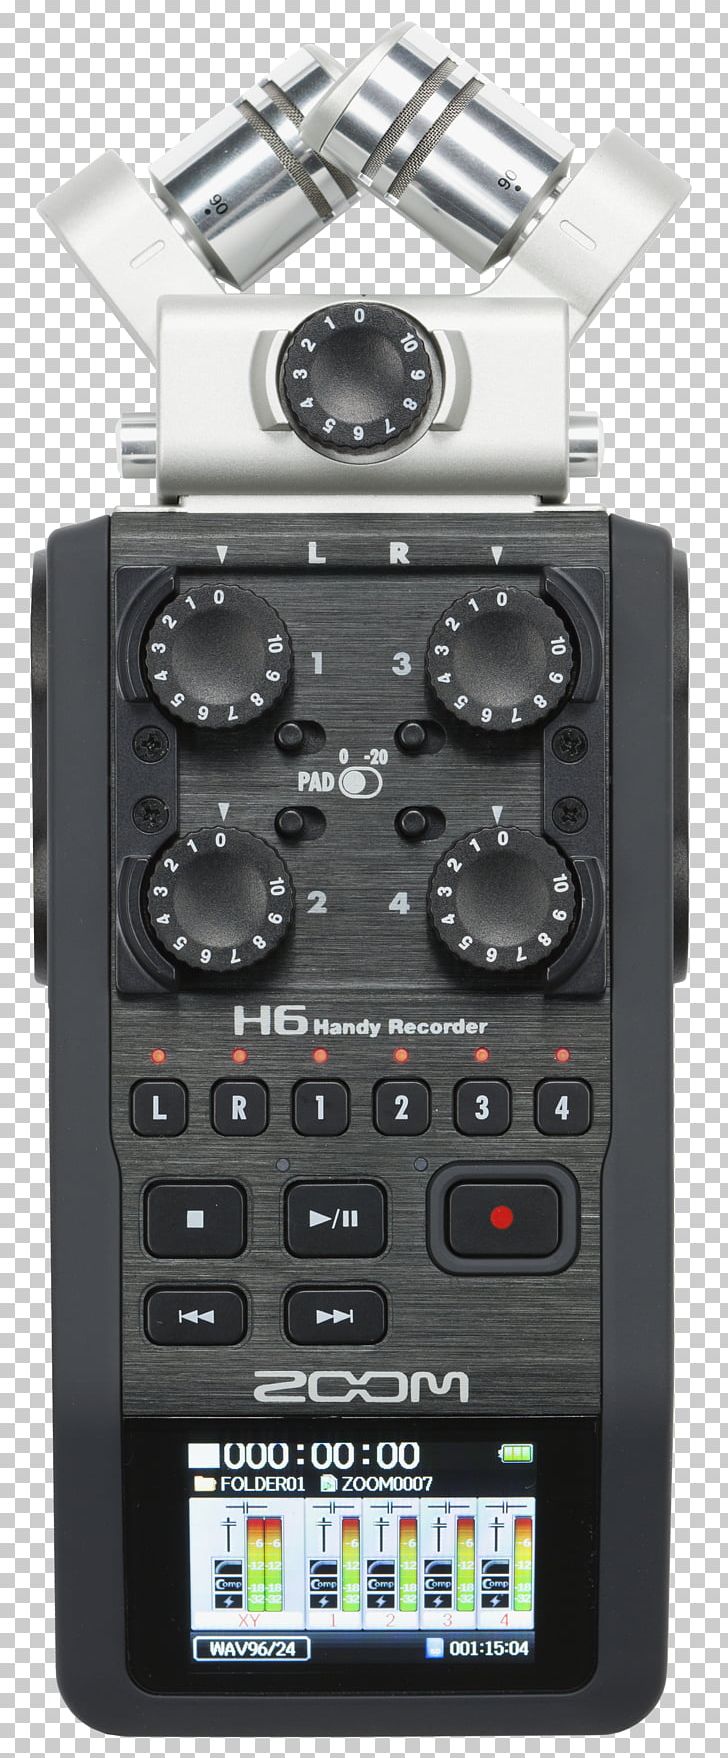 Microphone Zoom Corporation Audio Sound Recording And Reproduction Zoom H2 Handy Recorder PNG, Clipart, Audio, Audio Equipment, Audio Mixers, Audio Signal, Digital Recording Free PNG Download